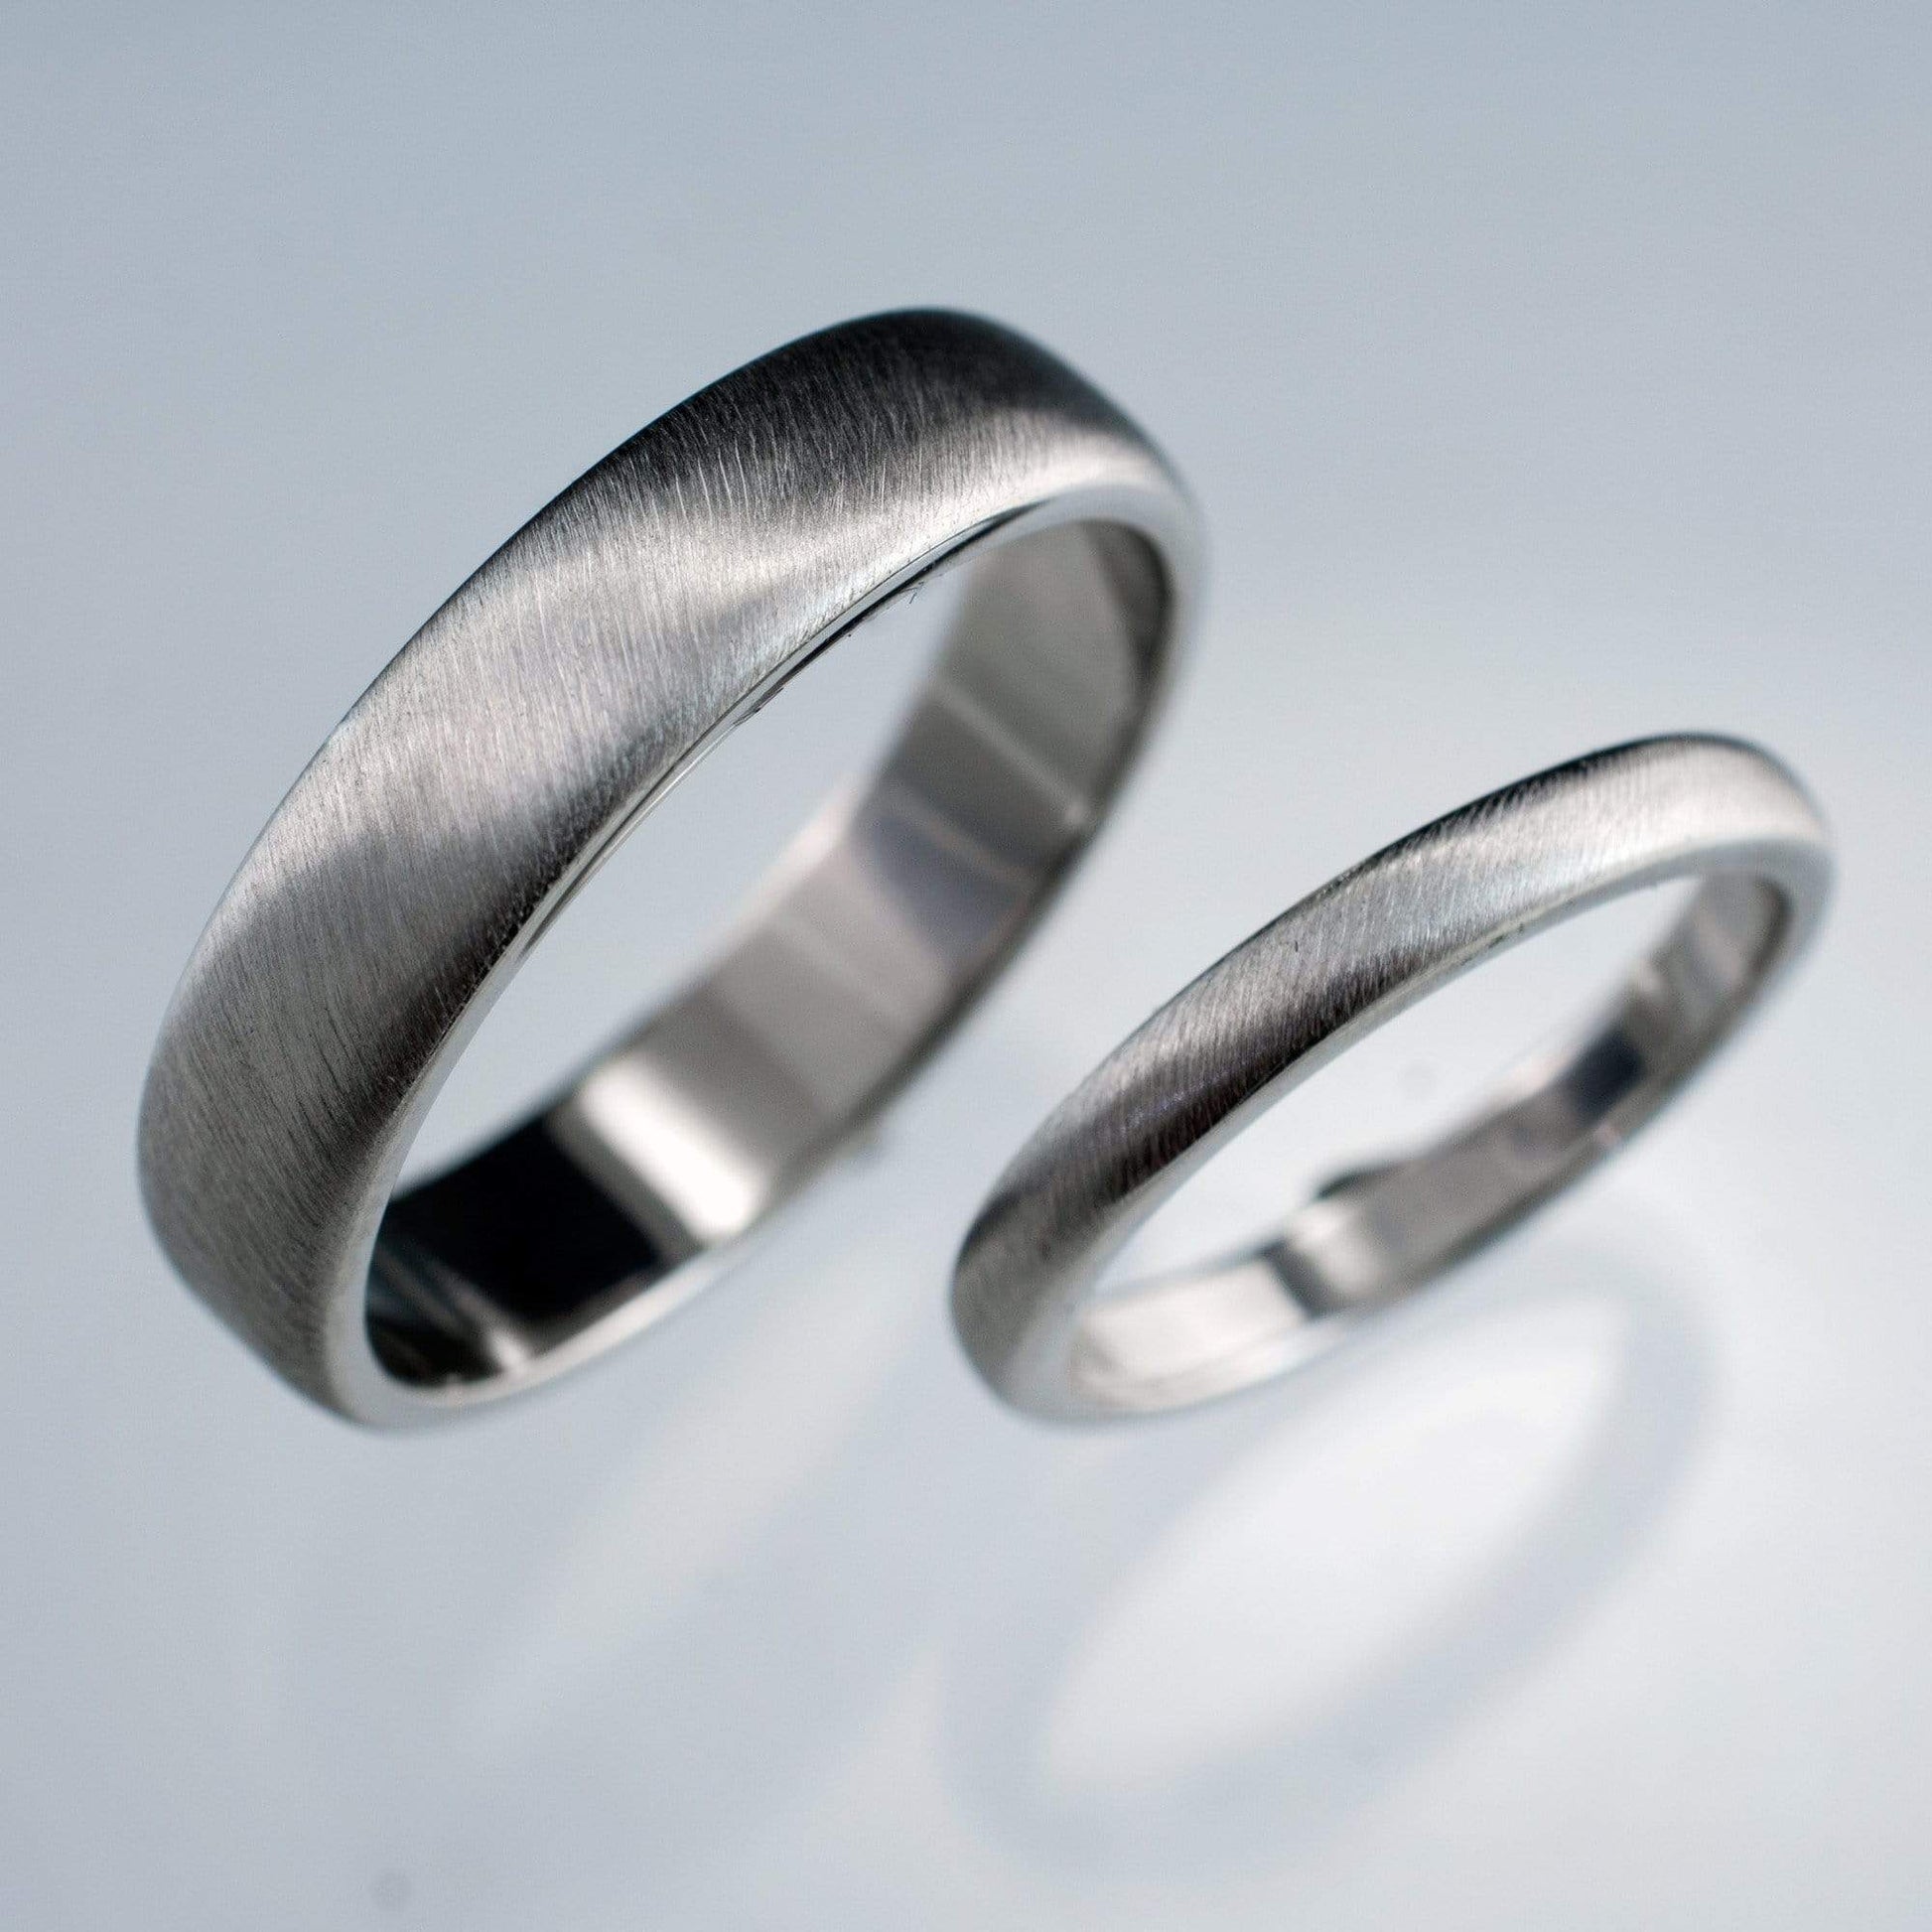 Simple Domed Wedding Bands, Set of 2 Wedding Rings Ring by Nodeform